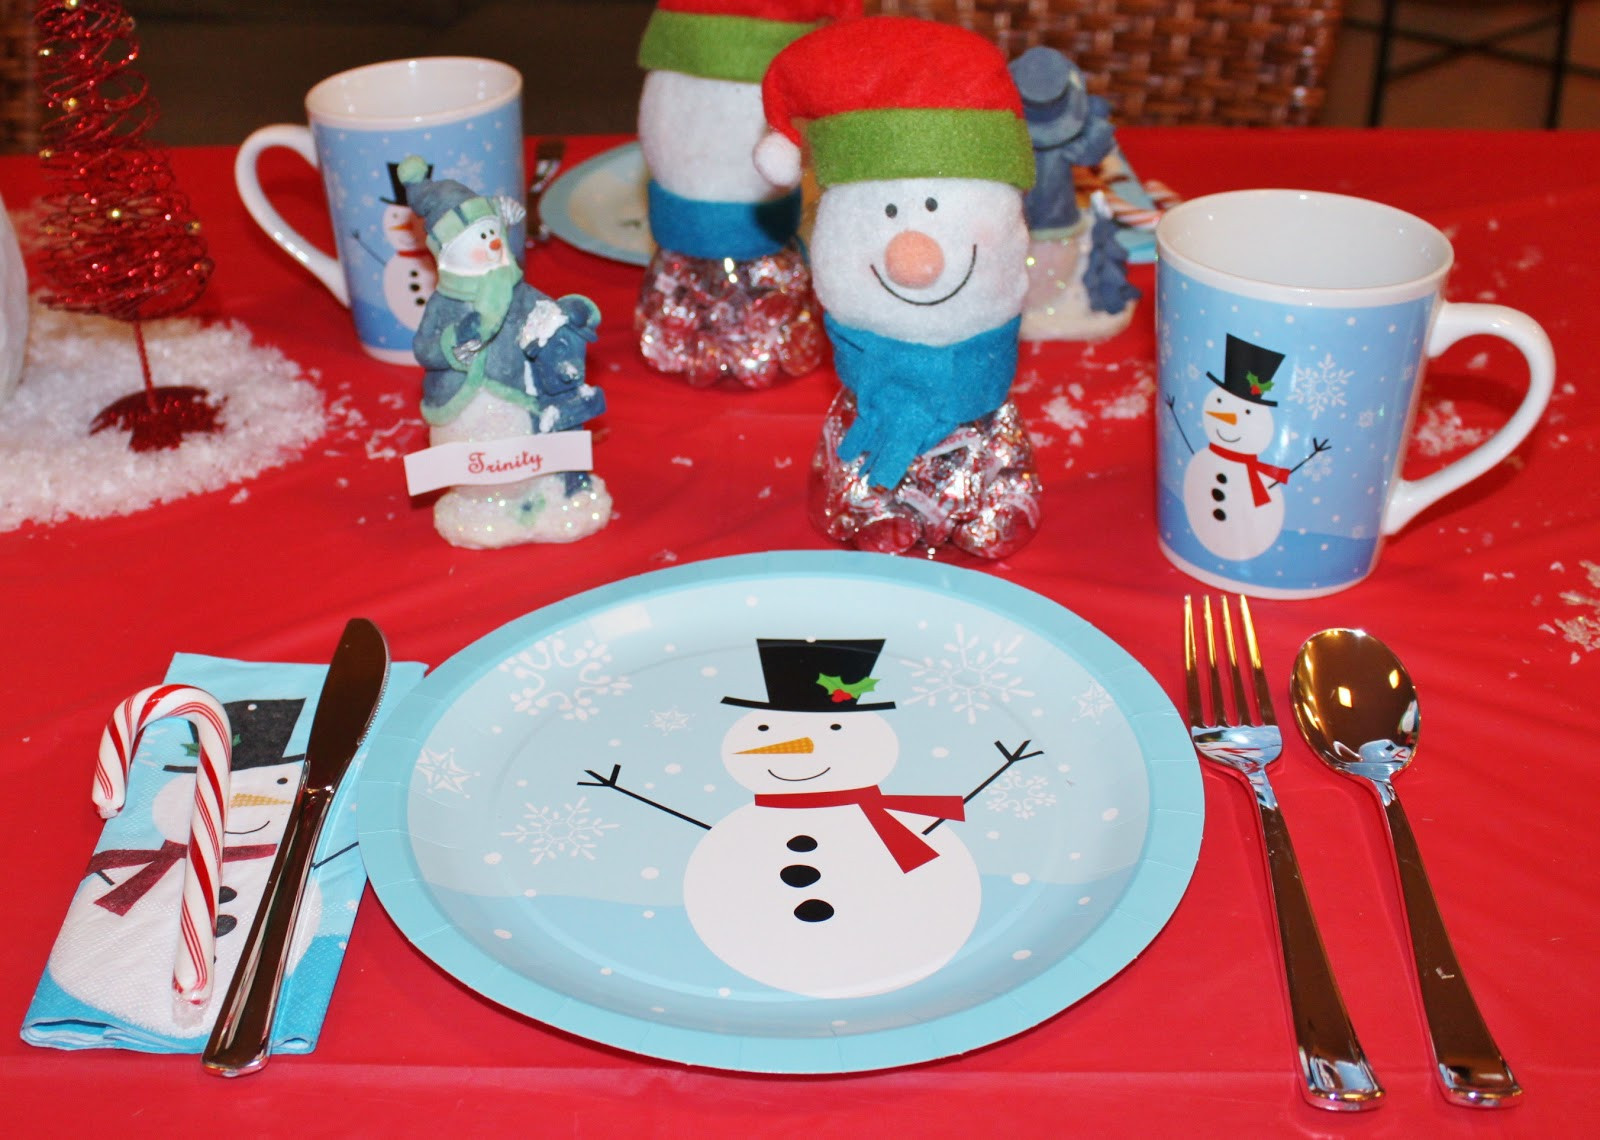 Girl Scout Christmas Party Ideas
 HUNTINGTON BEACH GIRL SCOUT TROOP 746